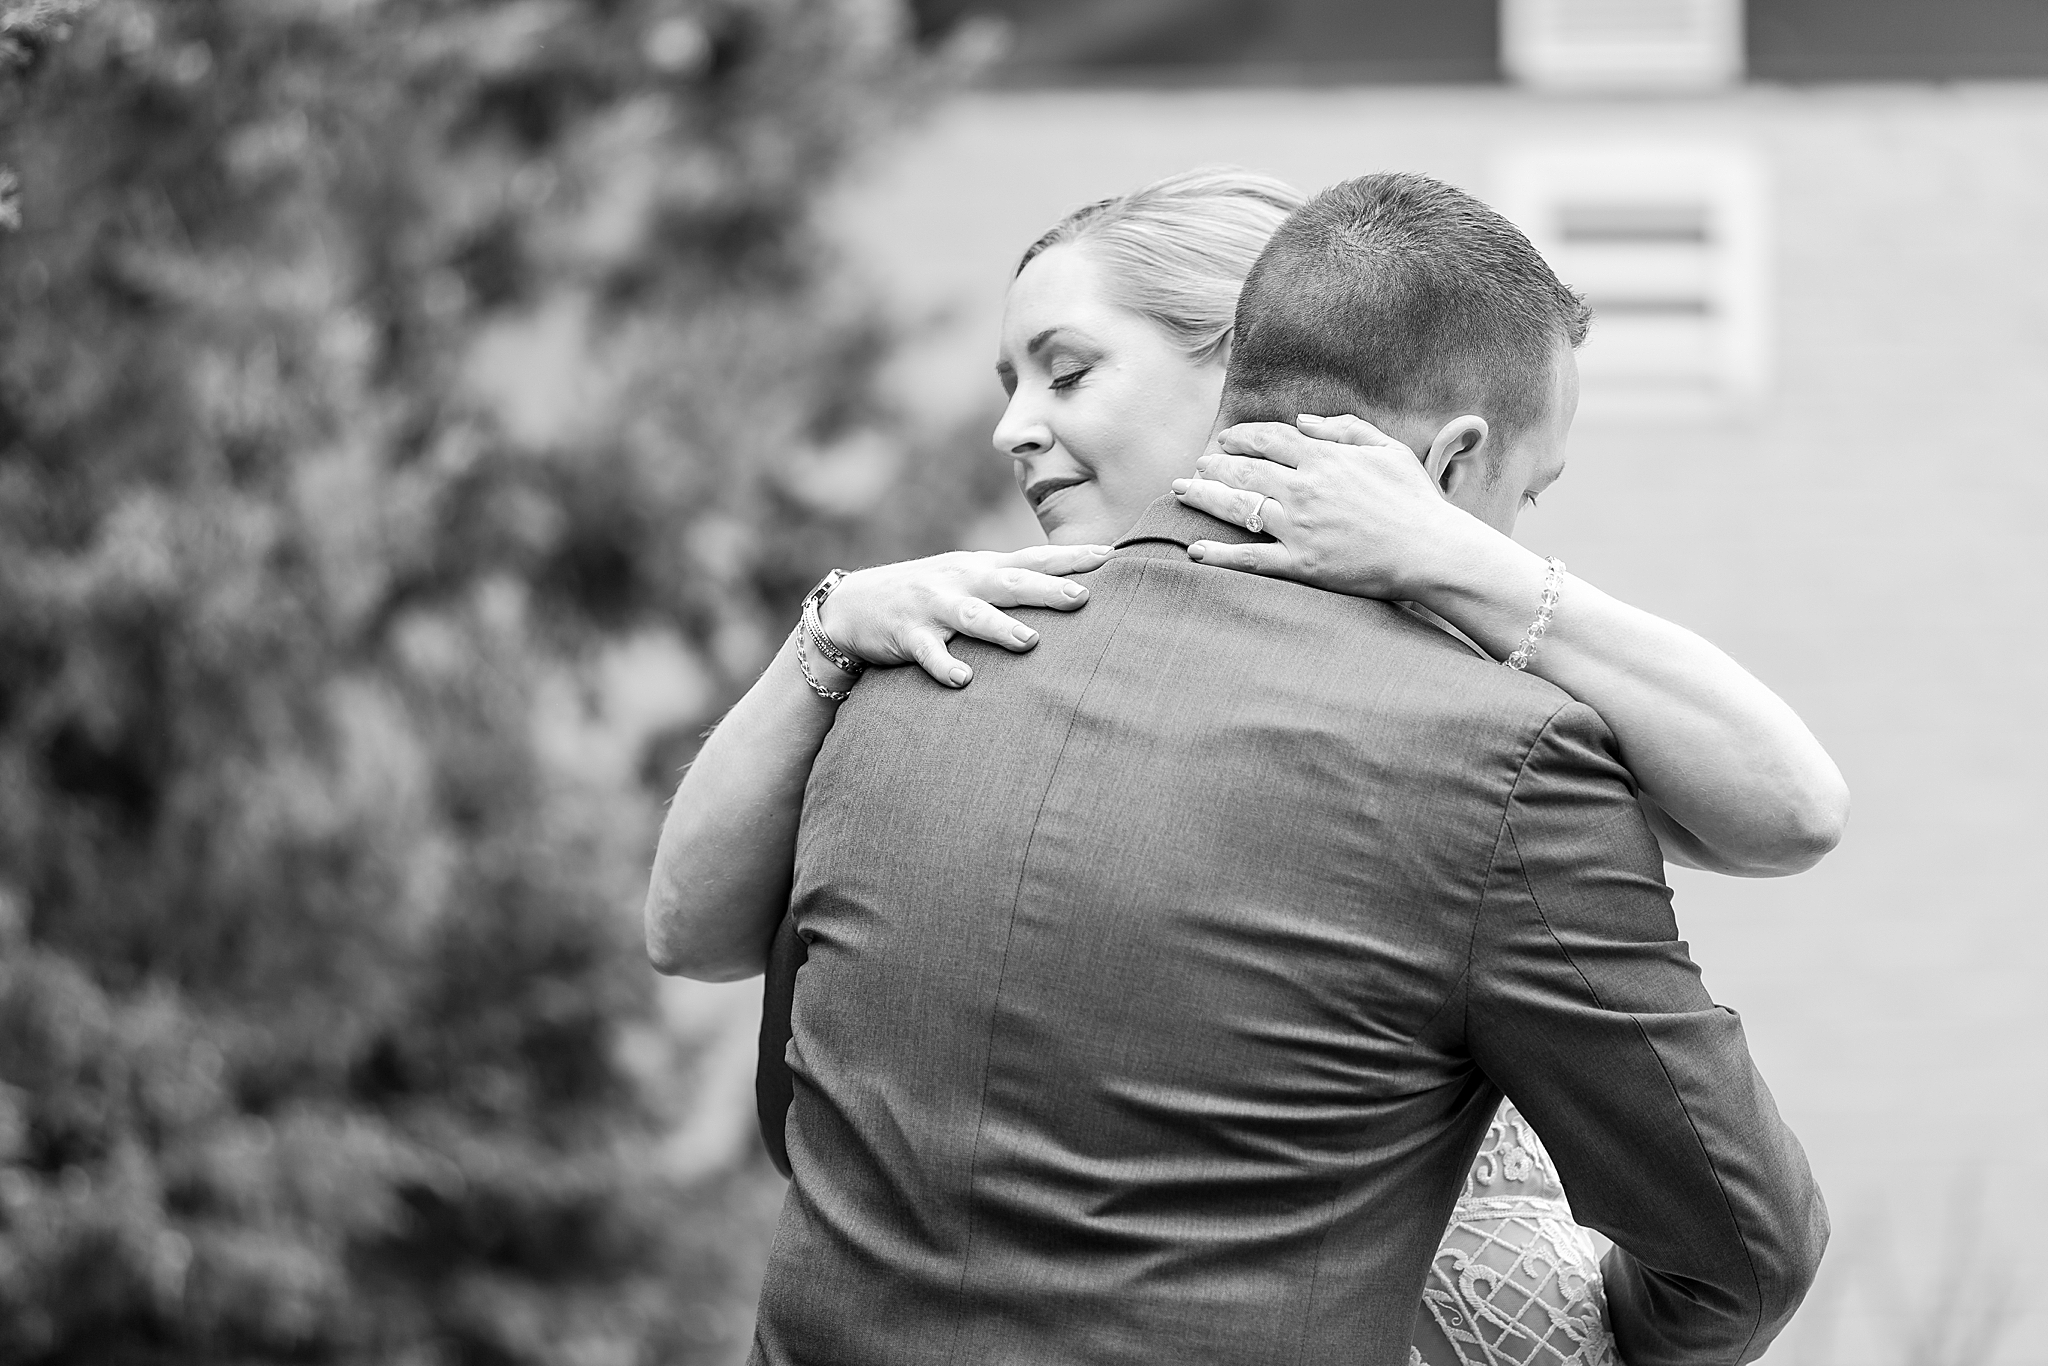 modern-romantic-wedding-photography-at-webers-in-ann-arbor-michigan-by-courtney-carolyn-photography_0021.jpg